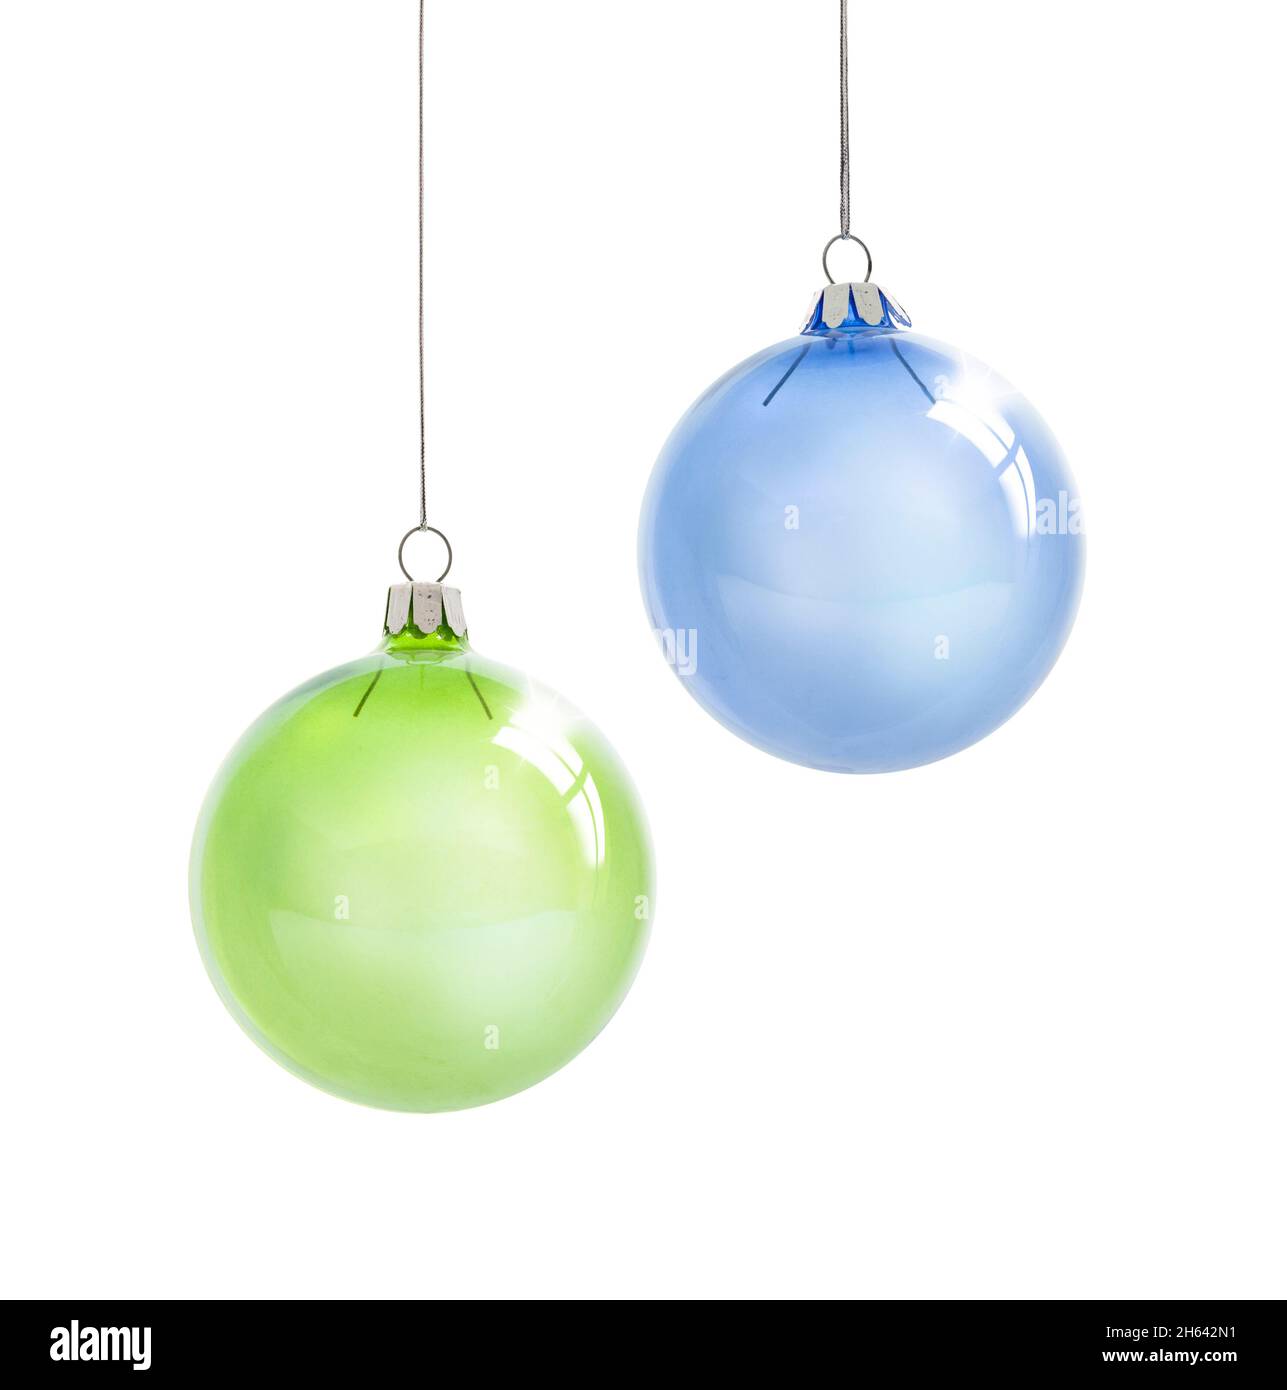 two beautiful christmas balls made of glass against a white background Stock Photo